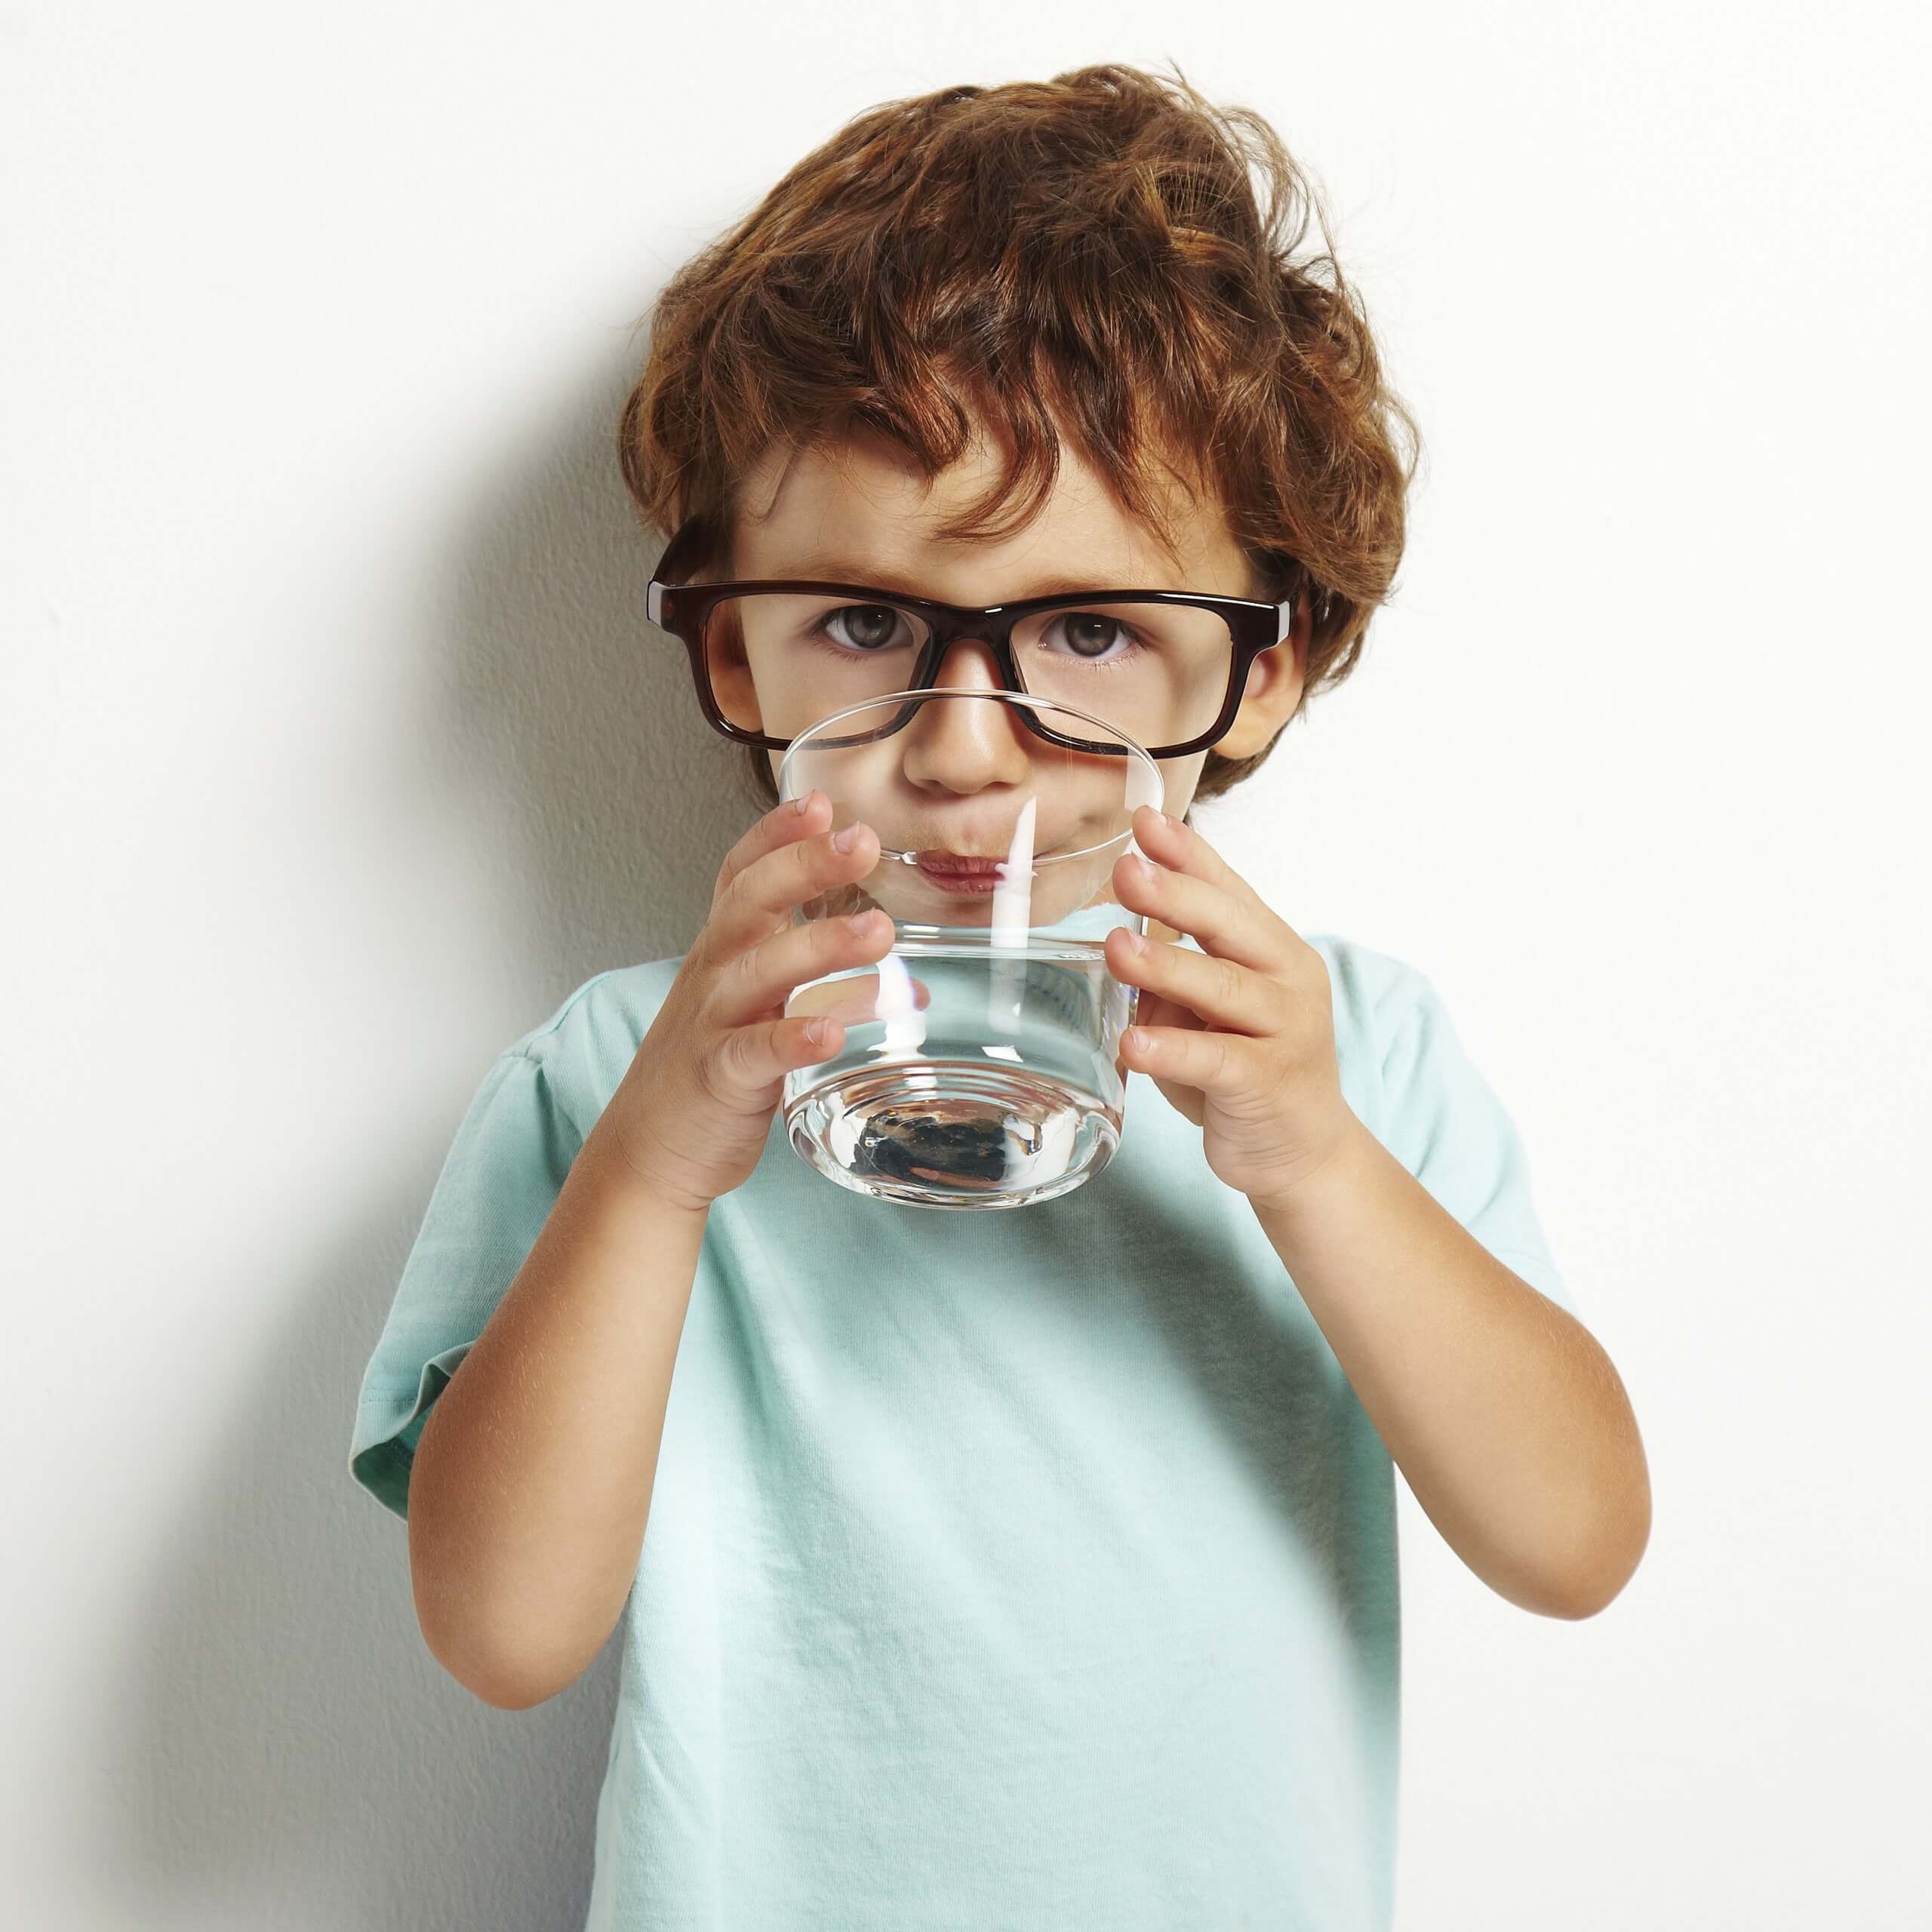 Portrait,Of,Boy,Drinking,Glass,Of,Water,Isolated,In,White